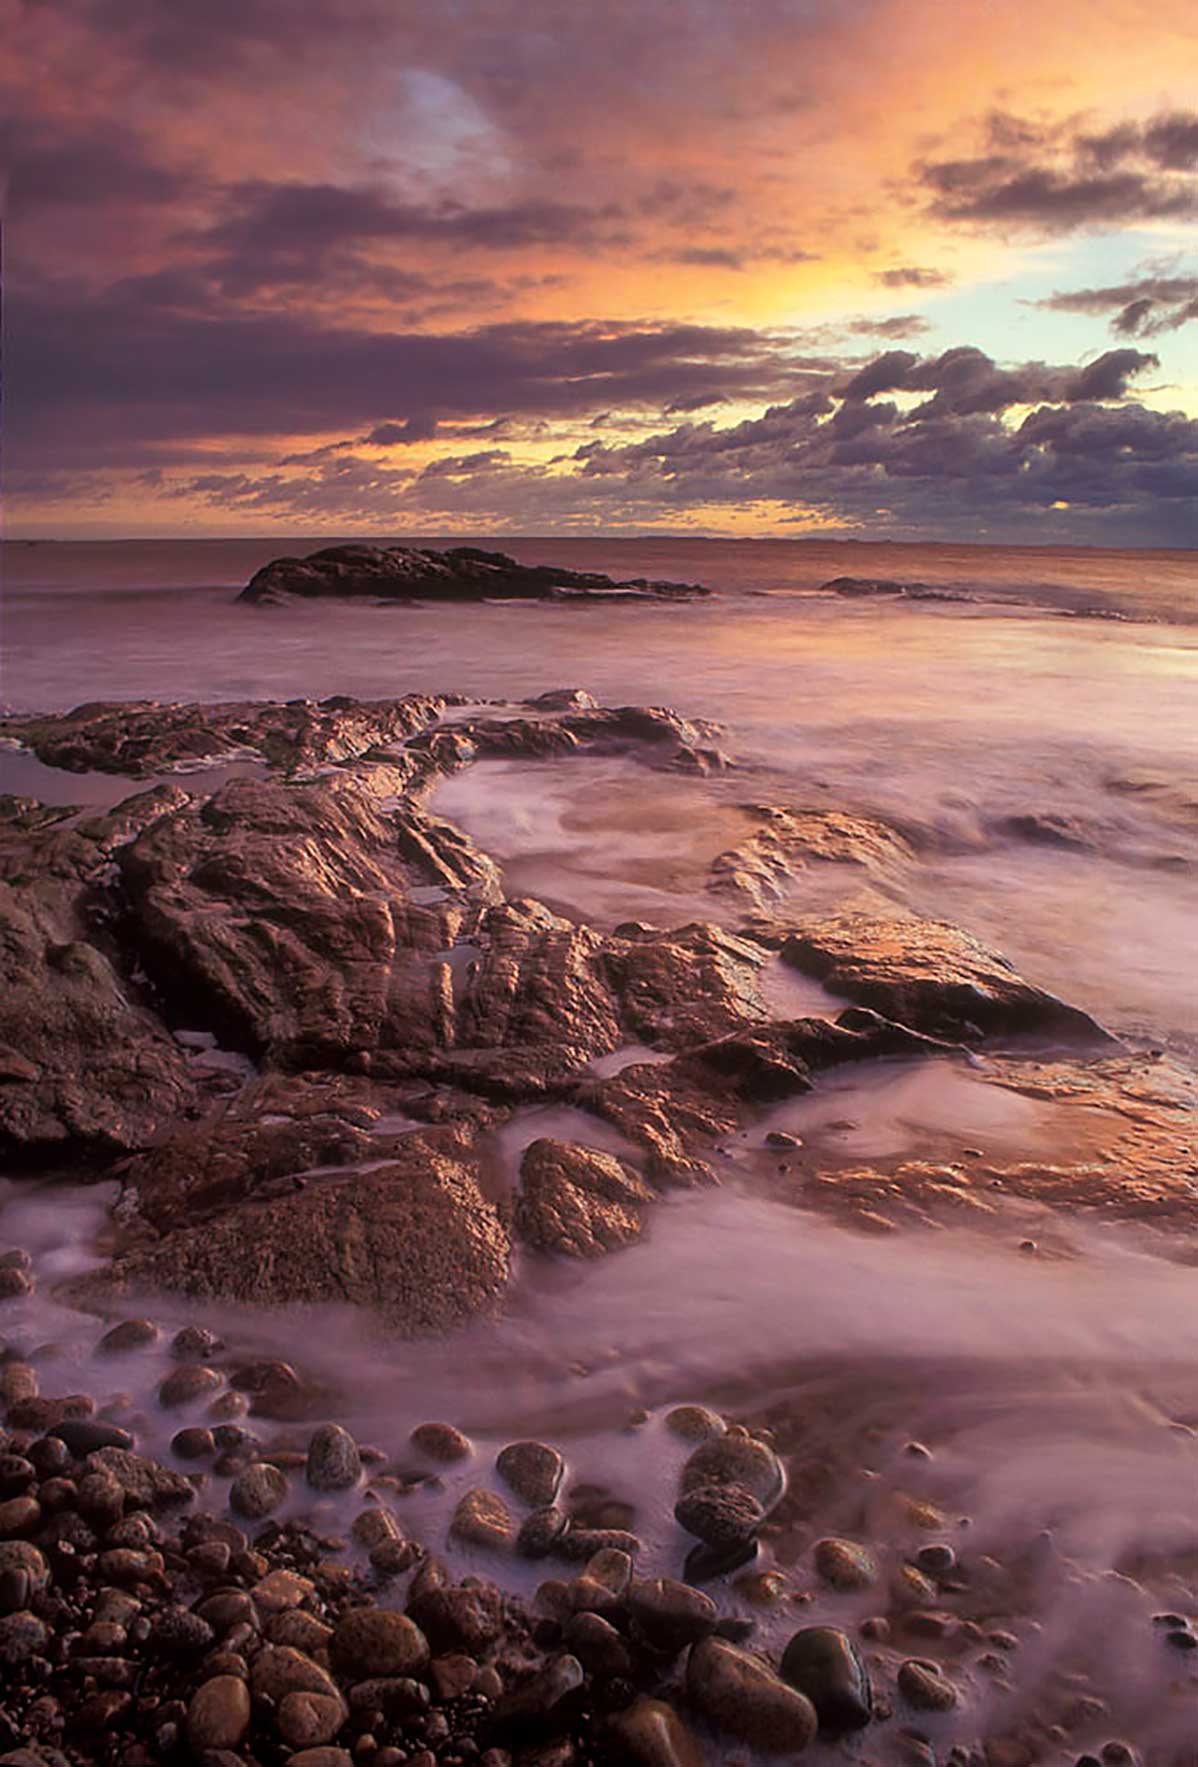 Photograph of water coming on the rocks at sunset on a beach